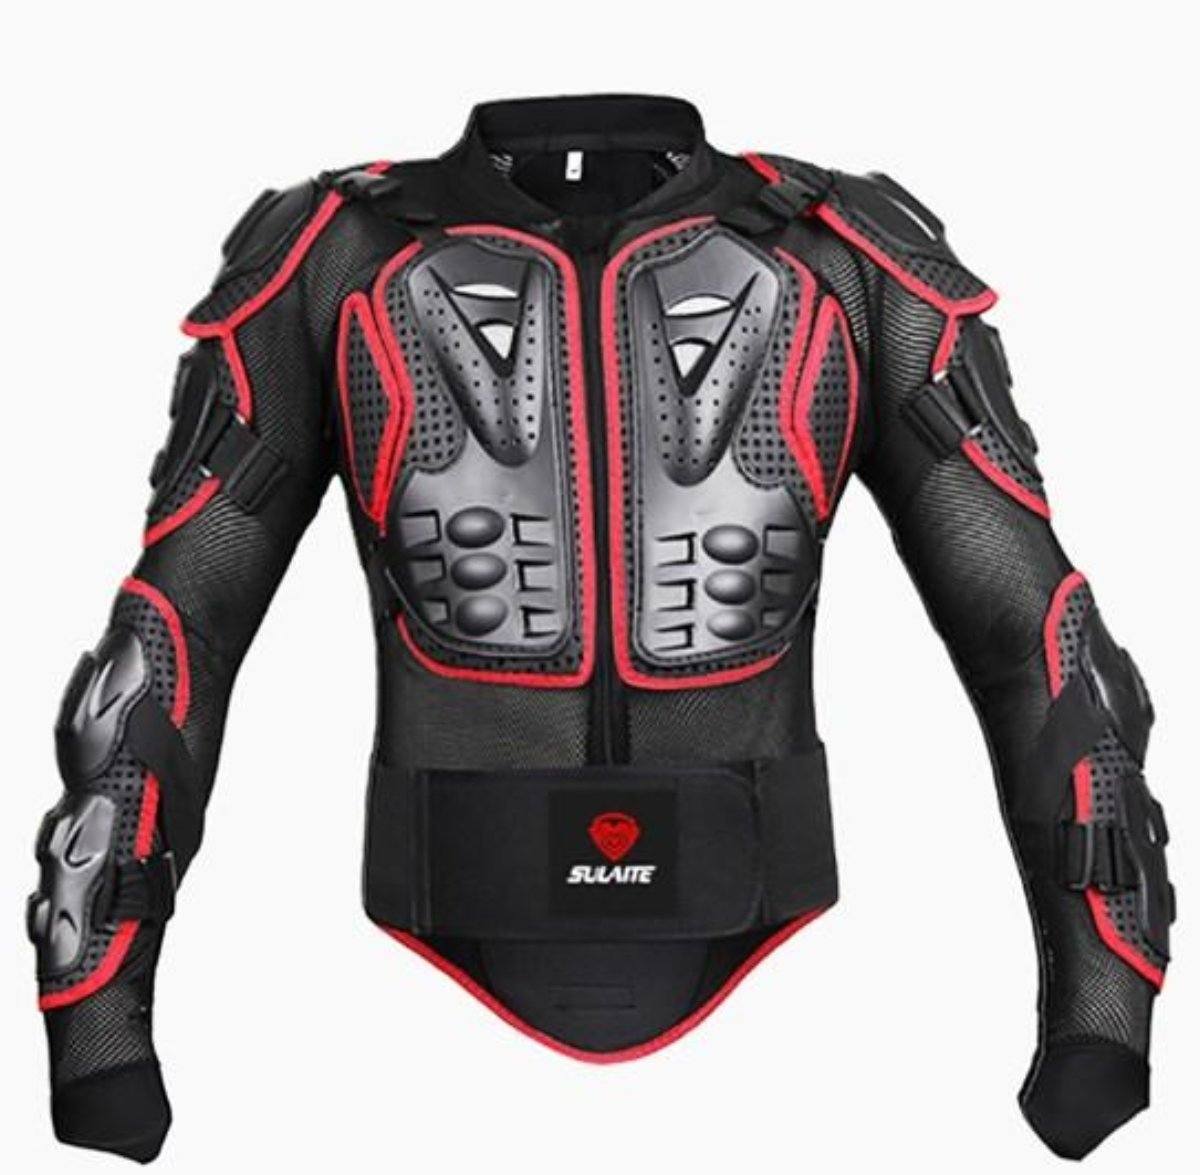 A high-impact polyethylene EVA Motorcycle Protective Armor Jacket in black and red, offering biker safety gear.